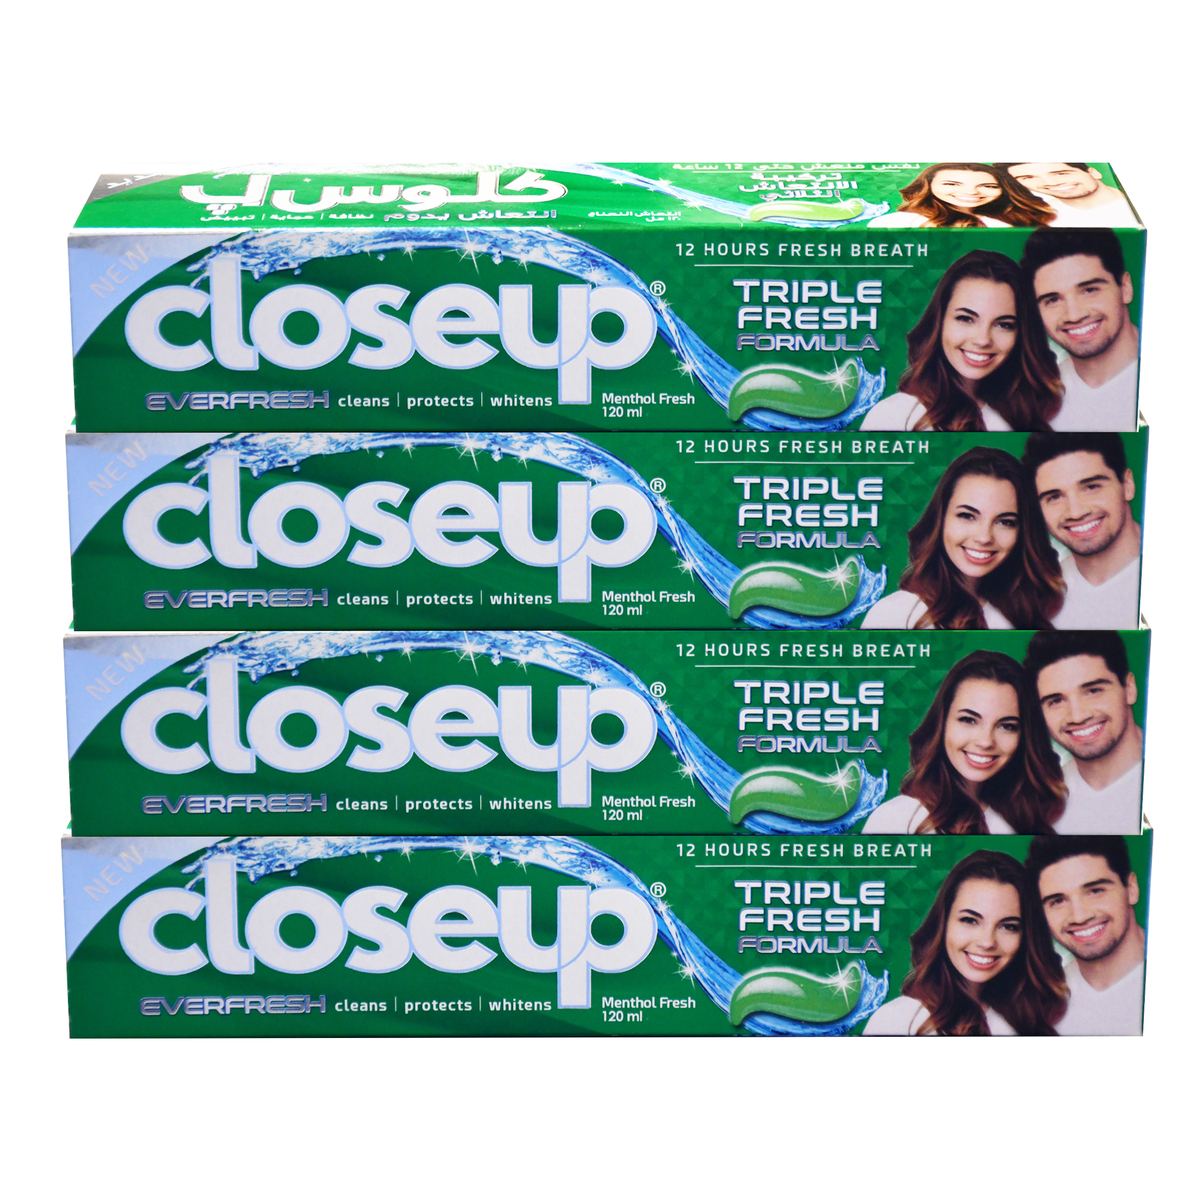 Closeup Toothpaste Assorted 4 x 120 ml